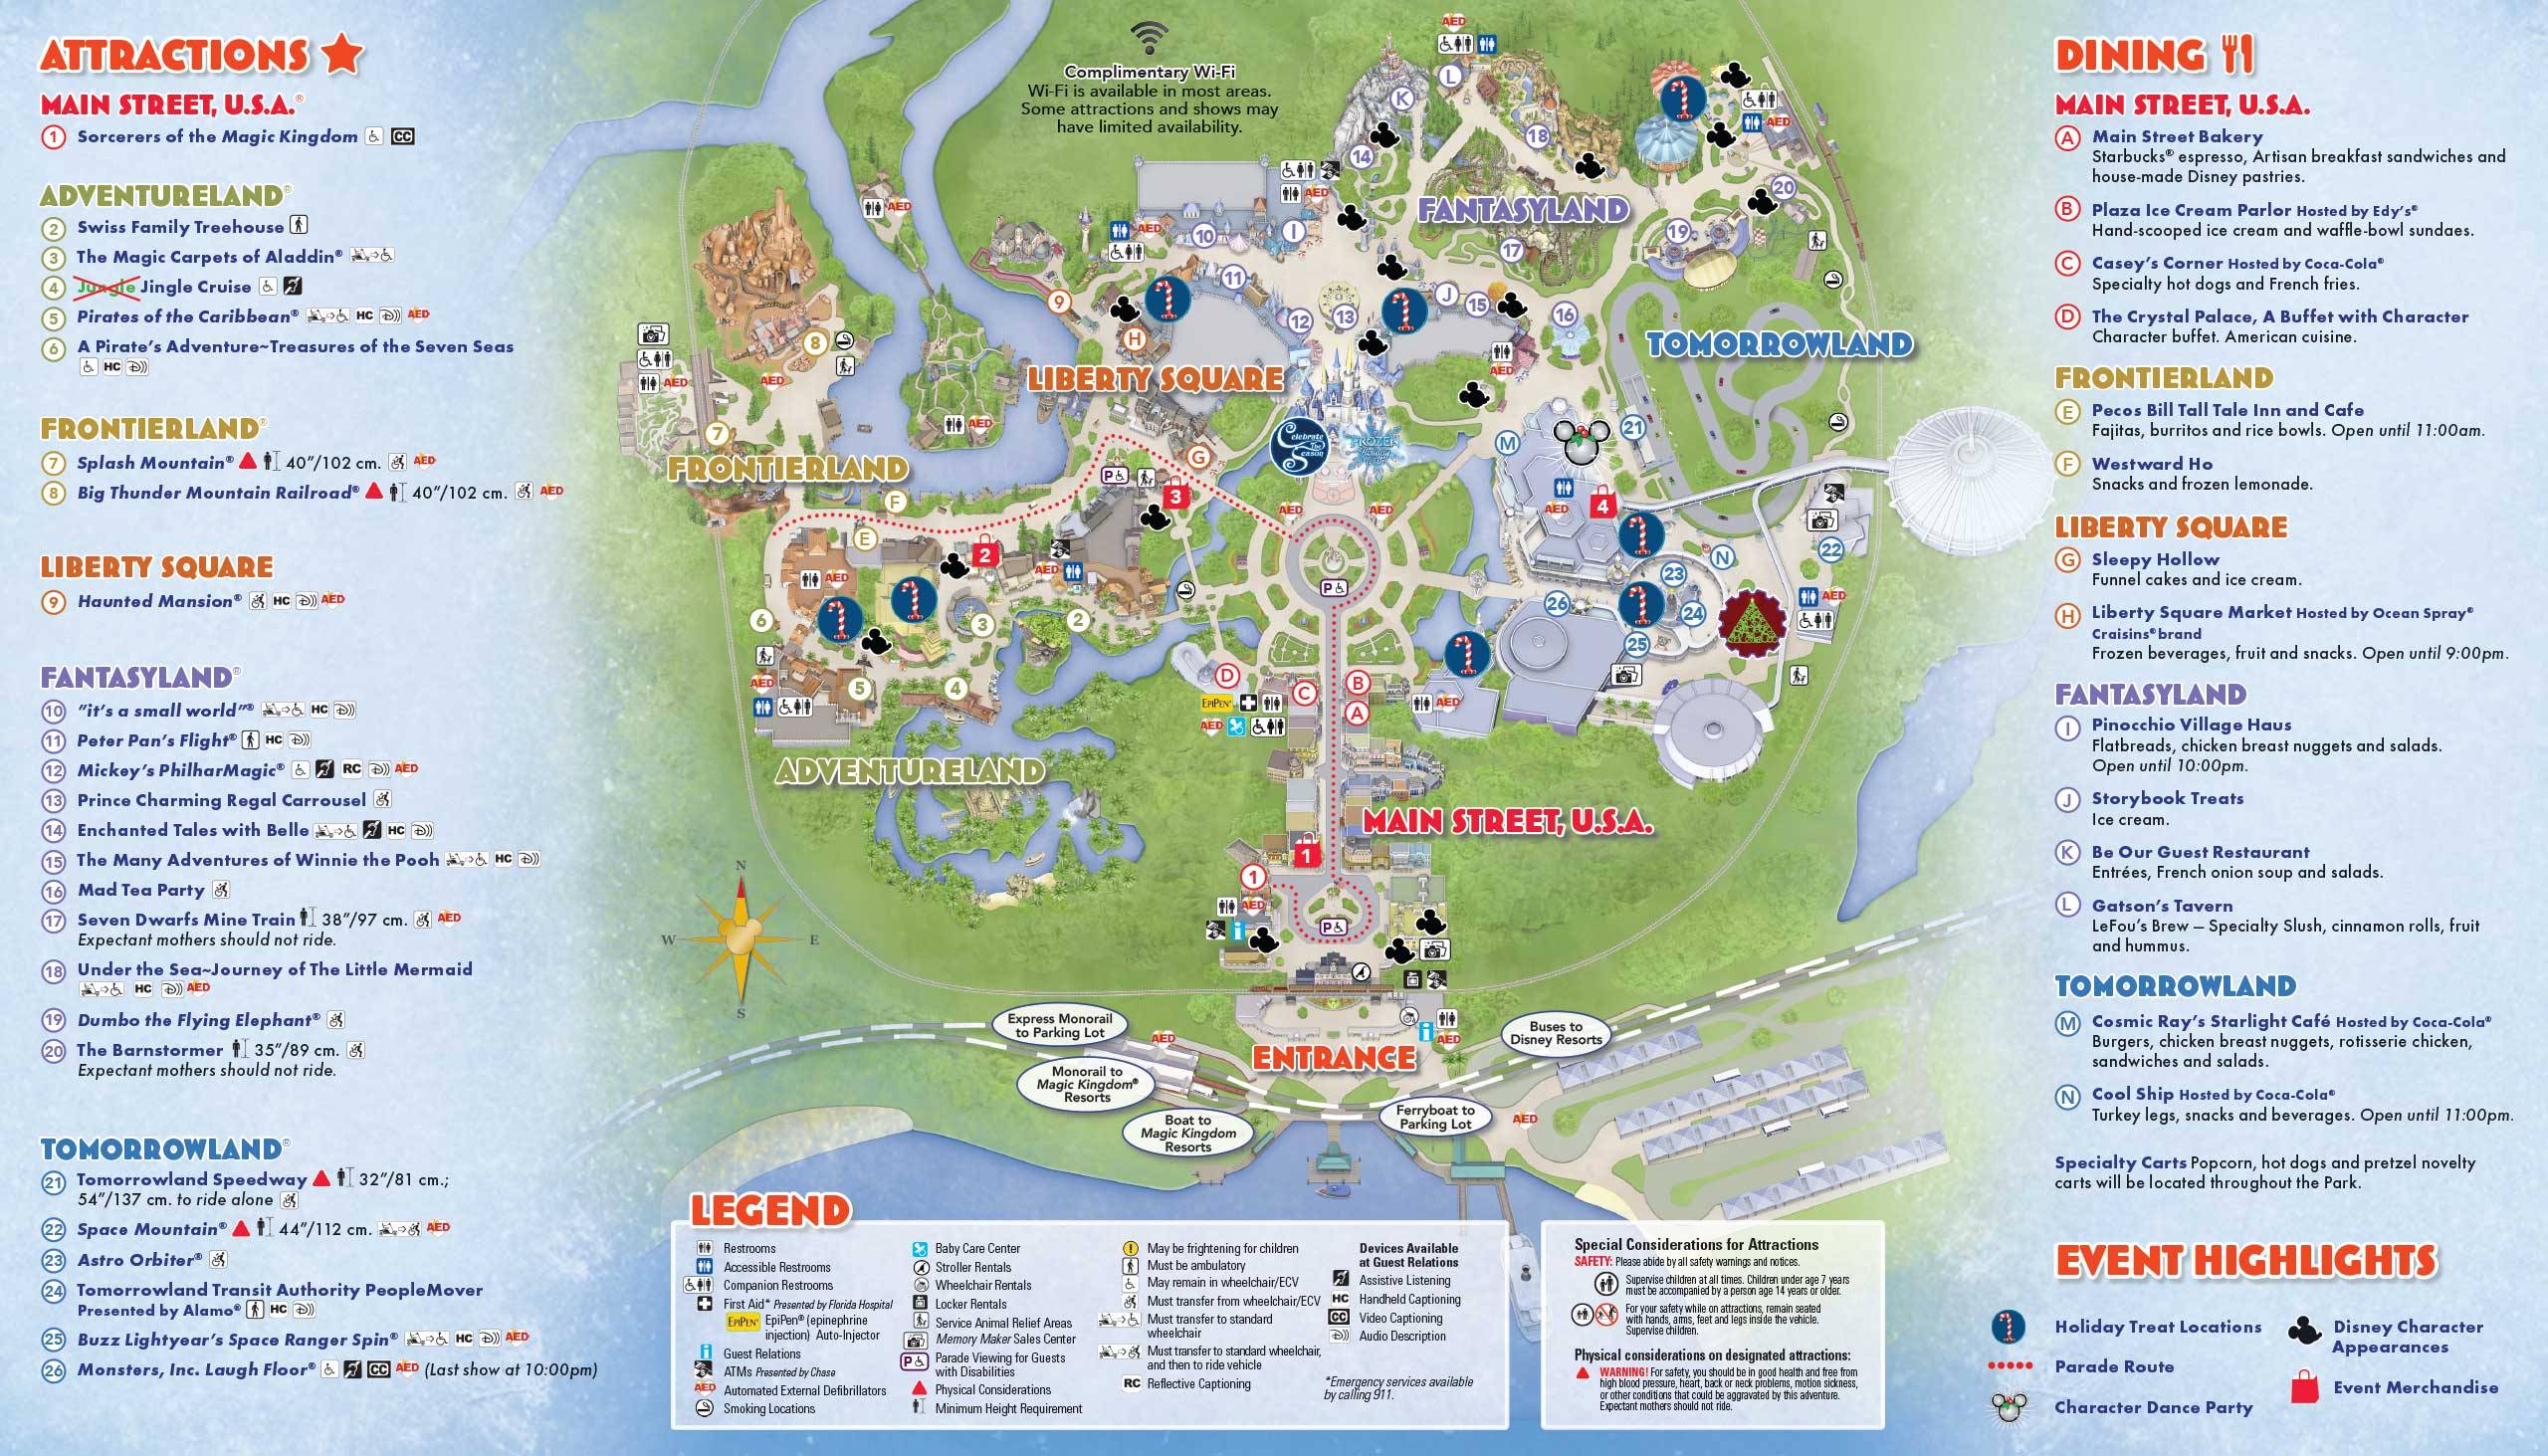 Mickey's Very Merry Christmas Party 2015 guide map